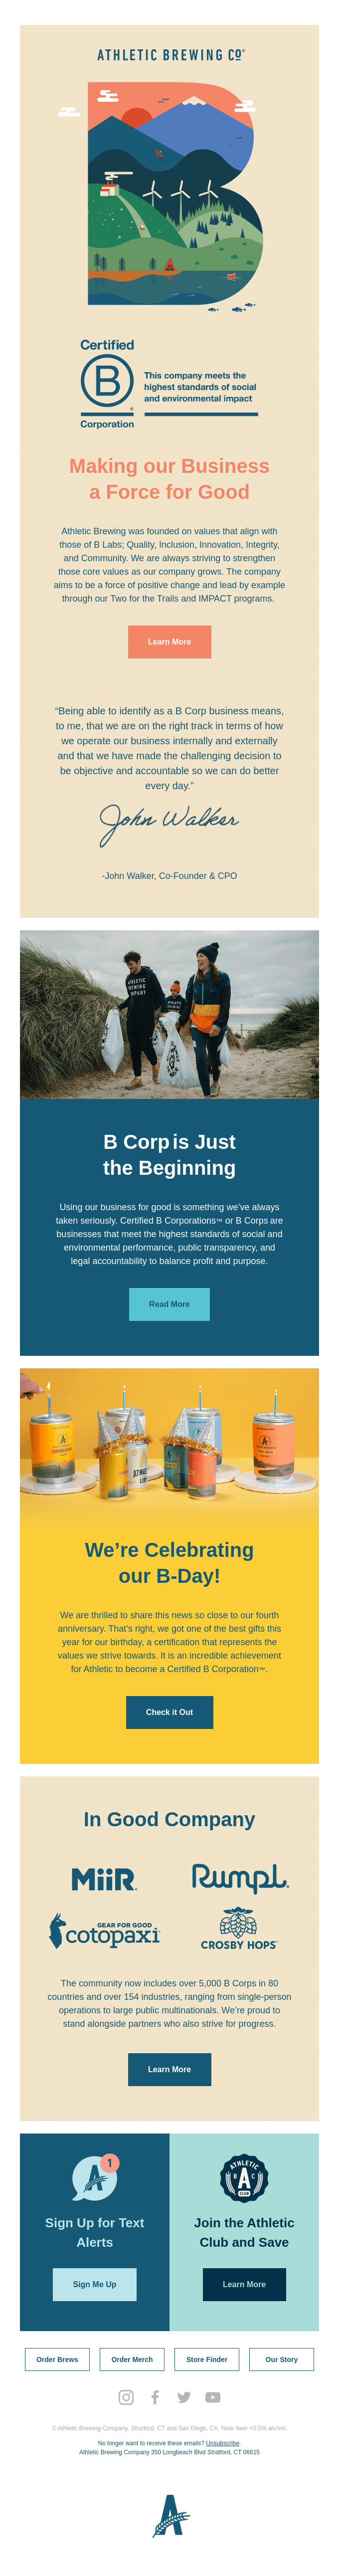 It's official! We're a Certified B Corp - Athletic Brewing Email Newsletter